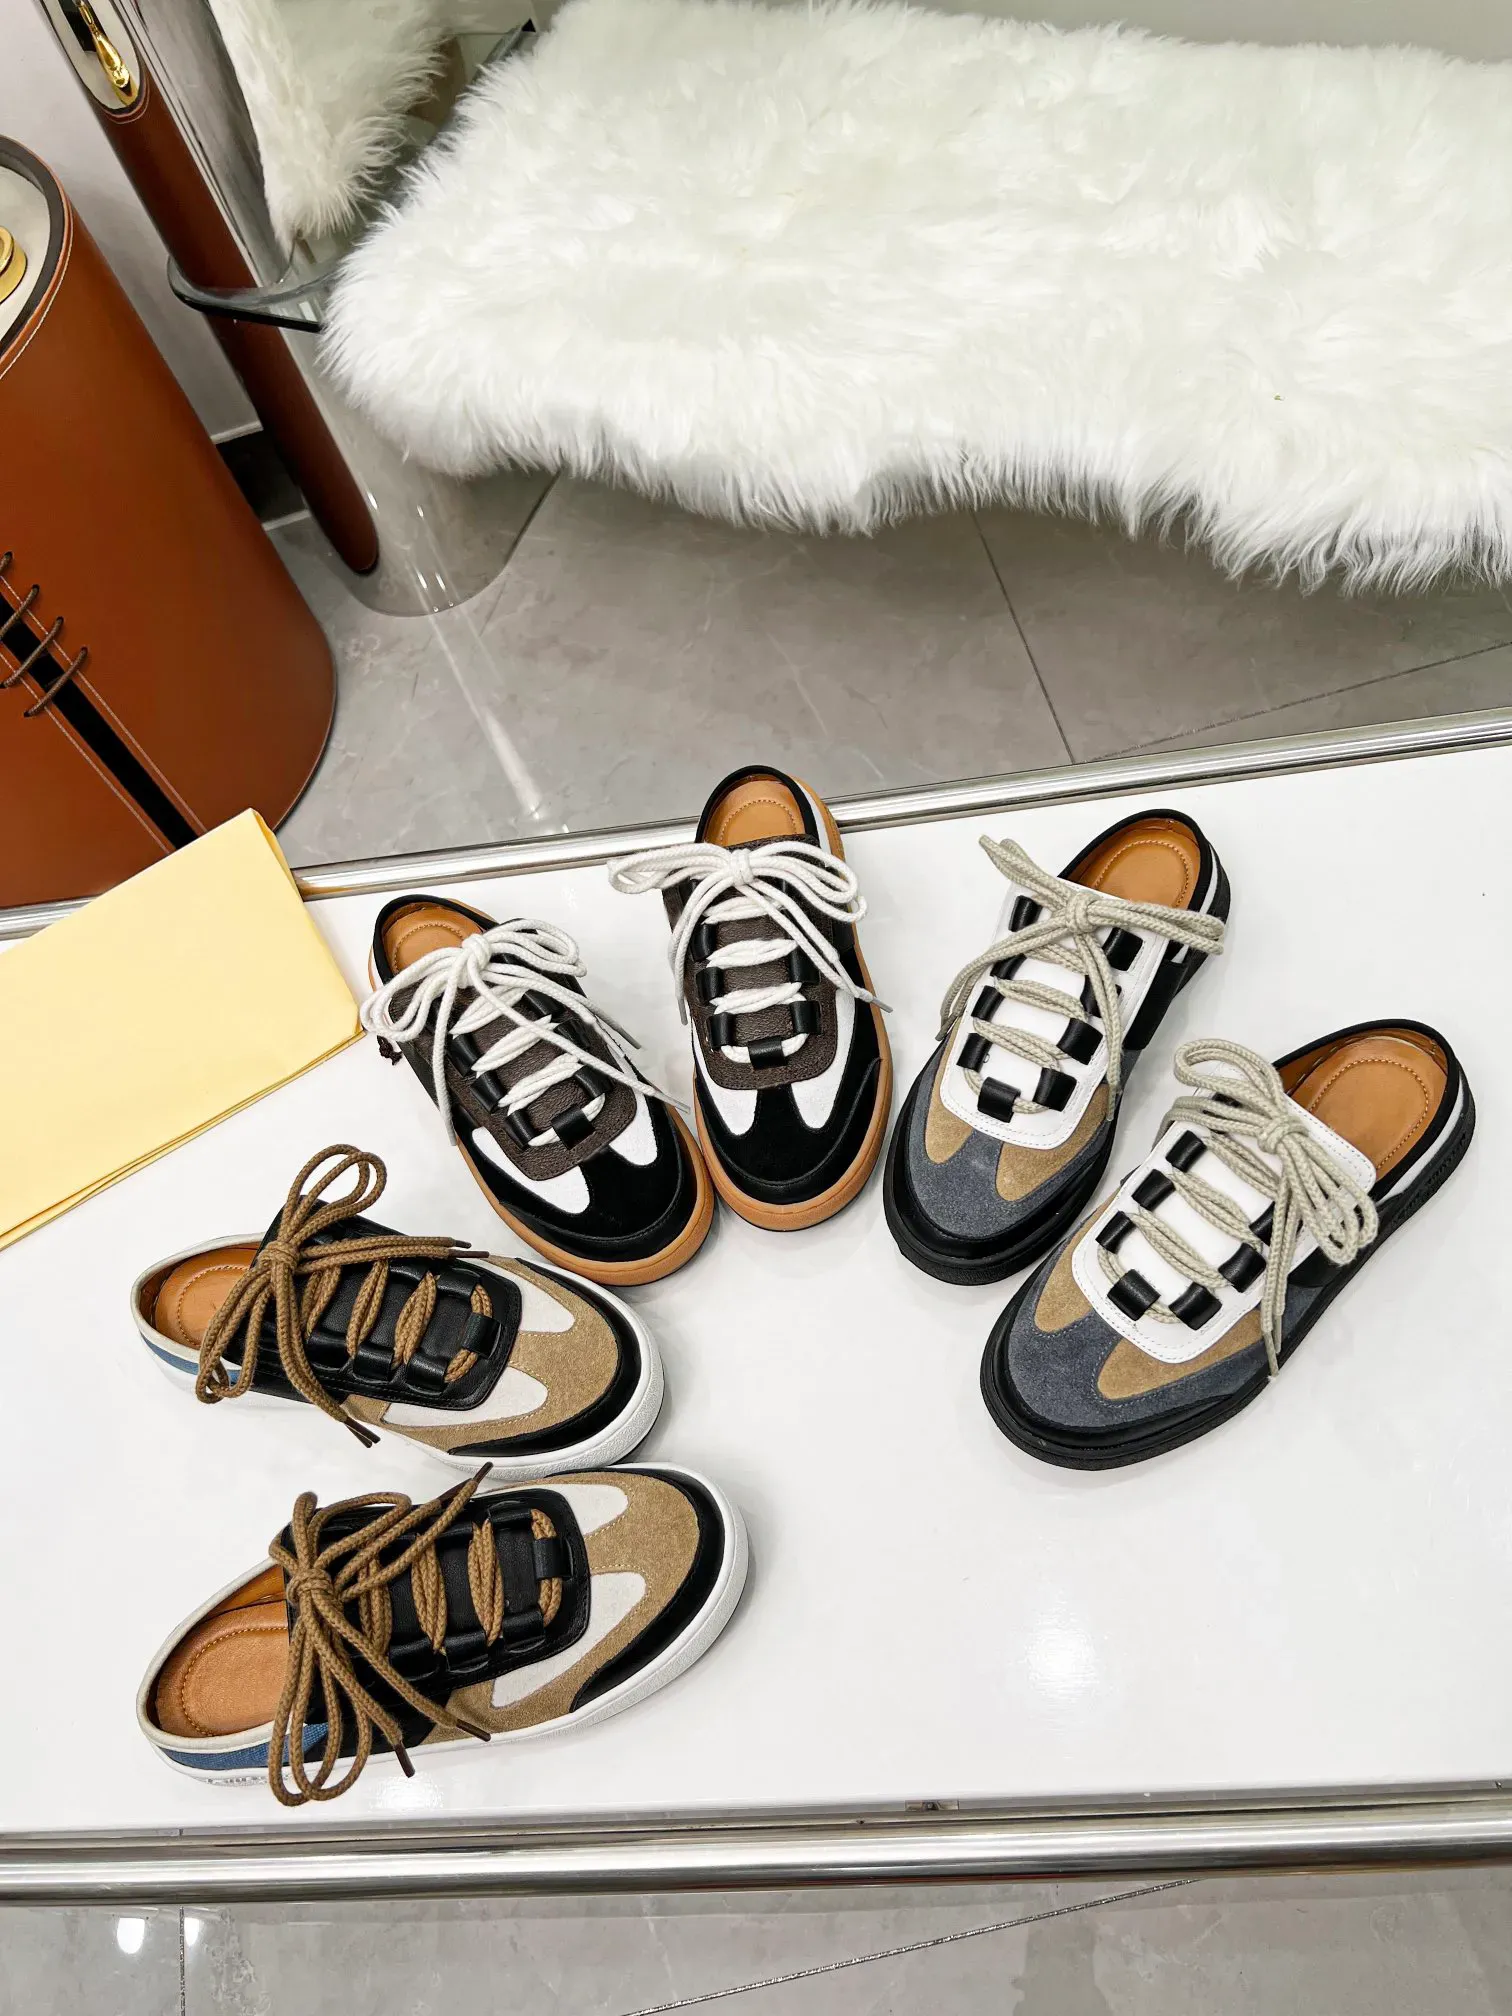 Autumn Designer Sneakers Slip-on Lace-up Slippers Black Brown Casual Shoes Fashionable Versatile Sneakers Flat Slippers Luxury Sandals Size 35-41